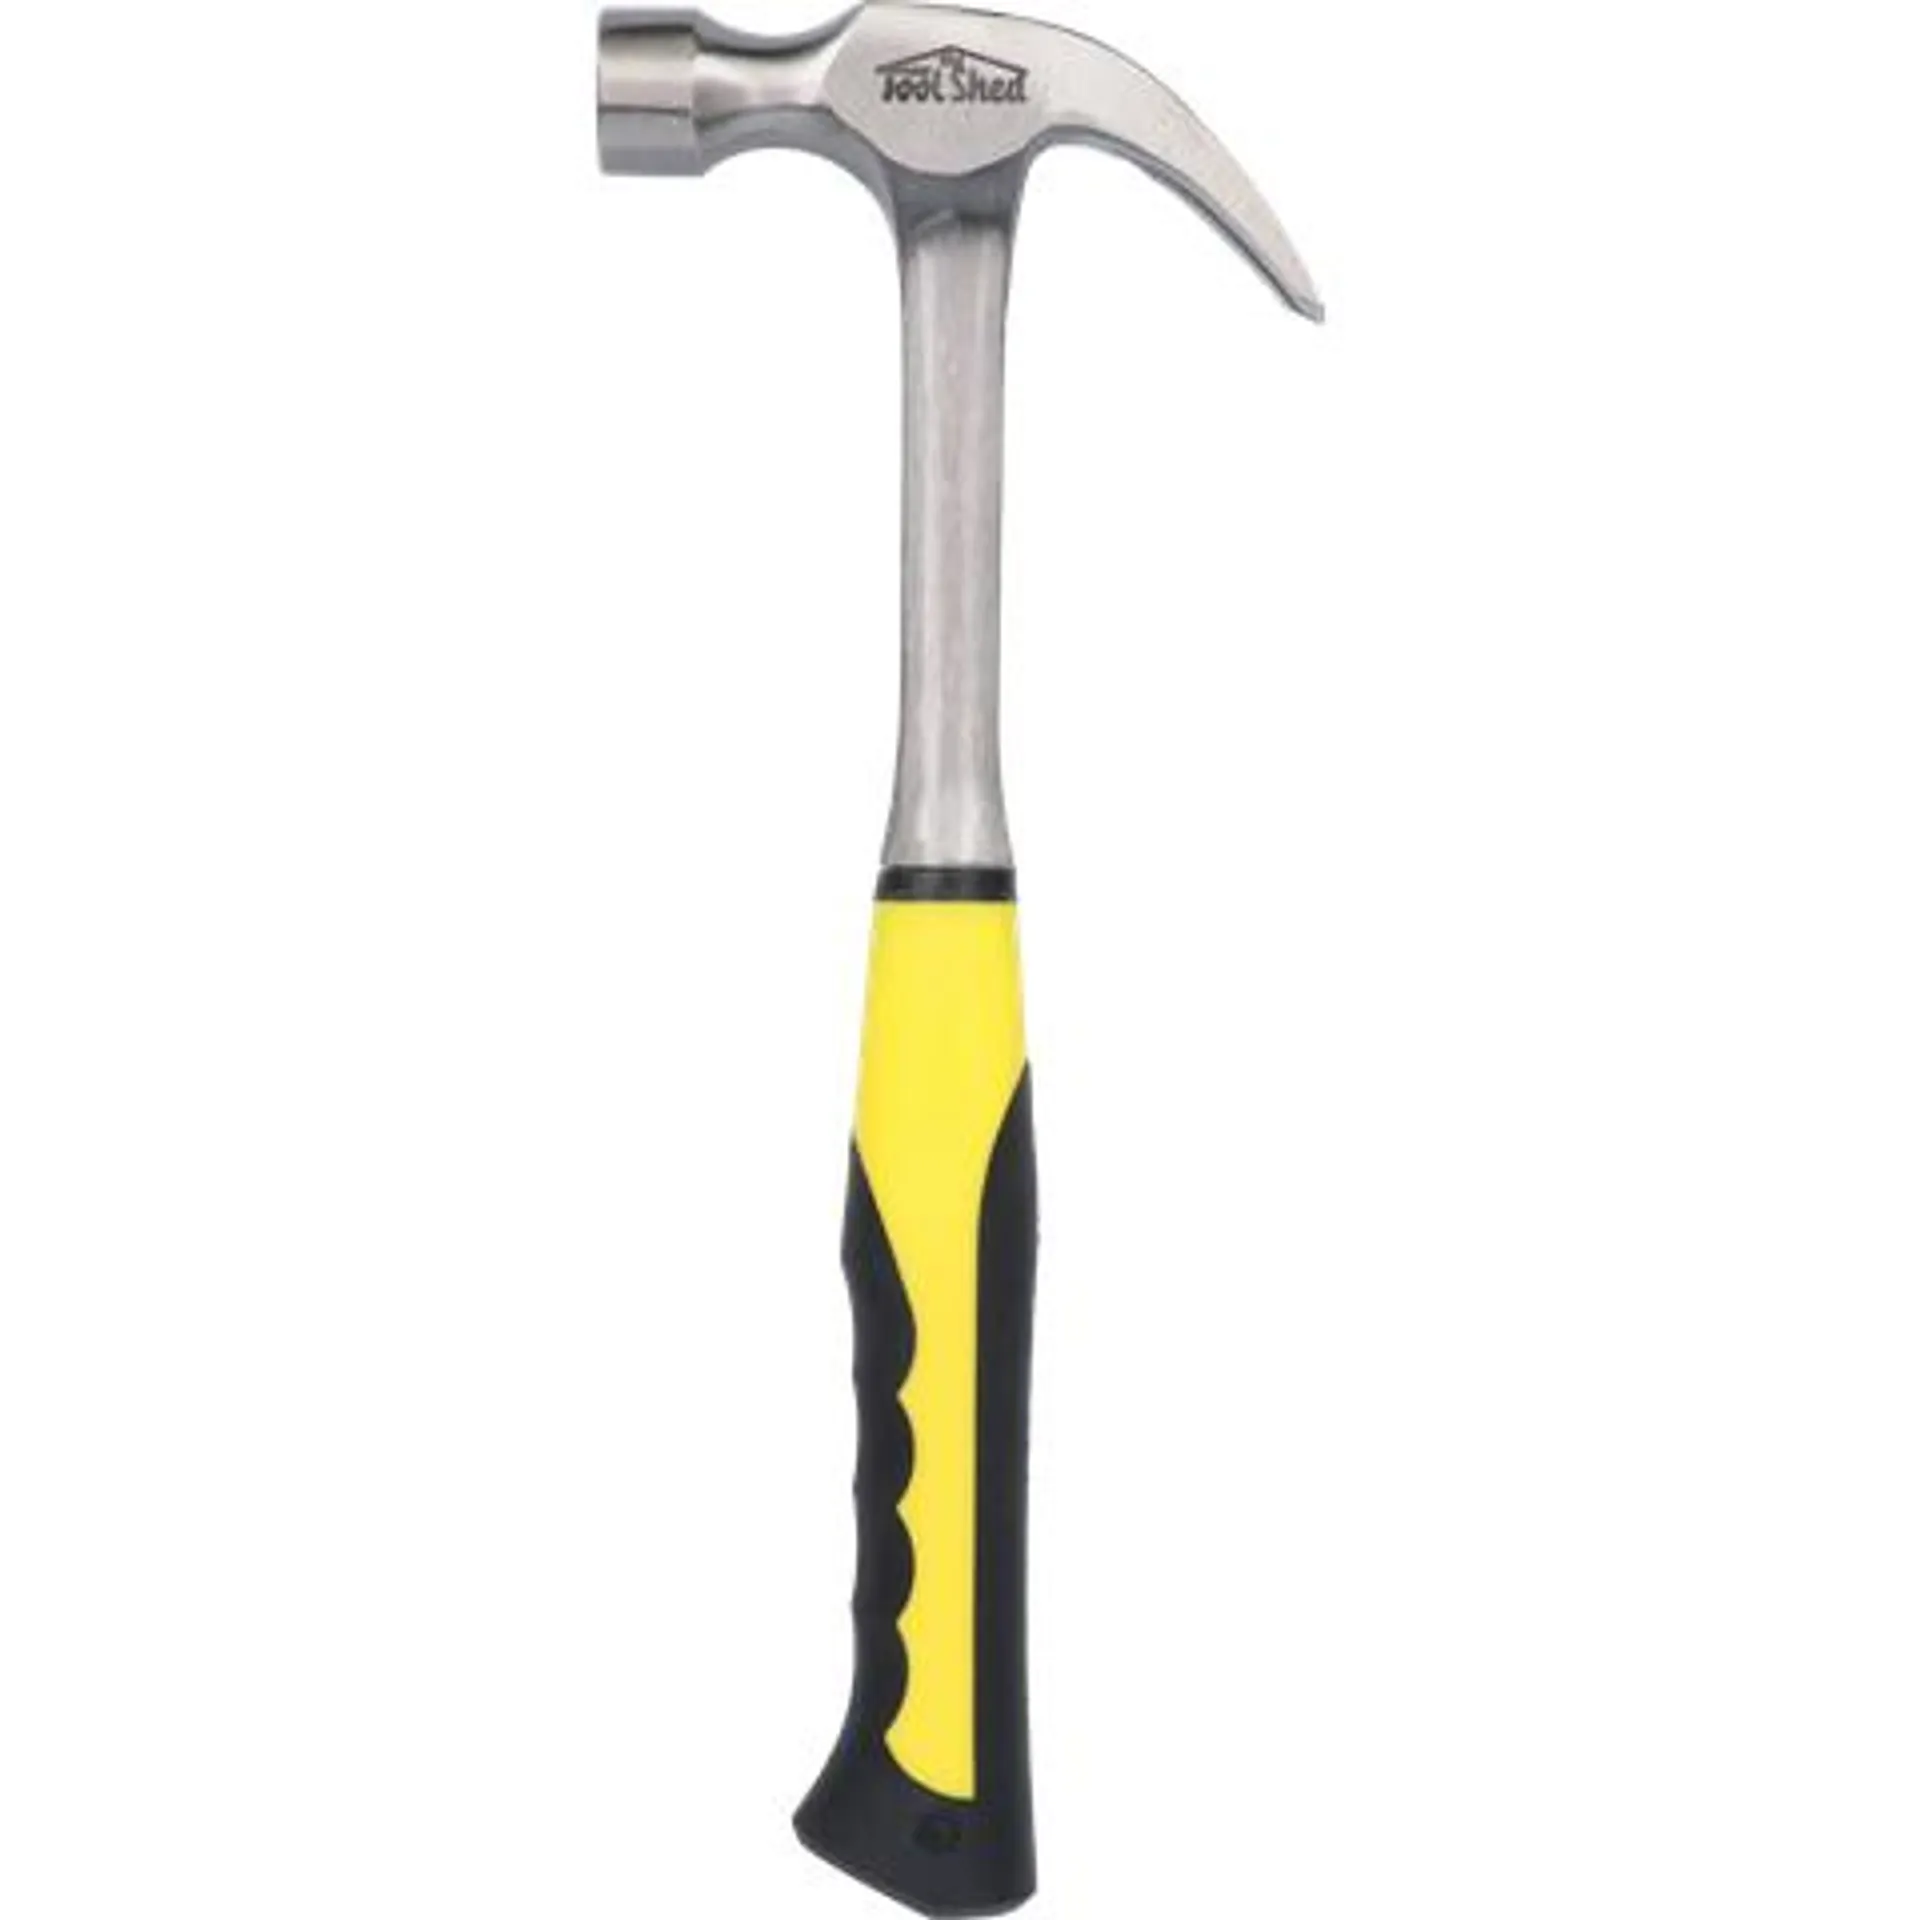 ToolShed Claw Hammer 20oz